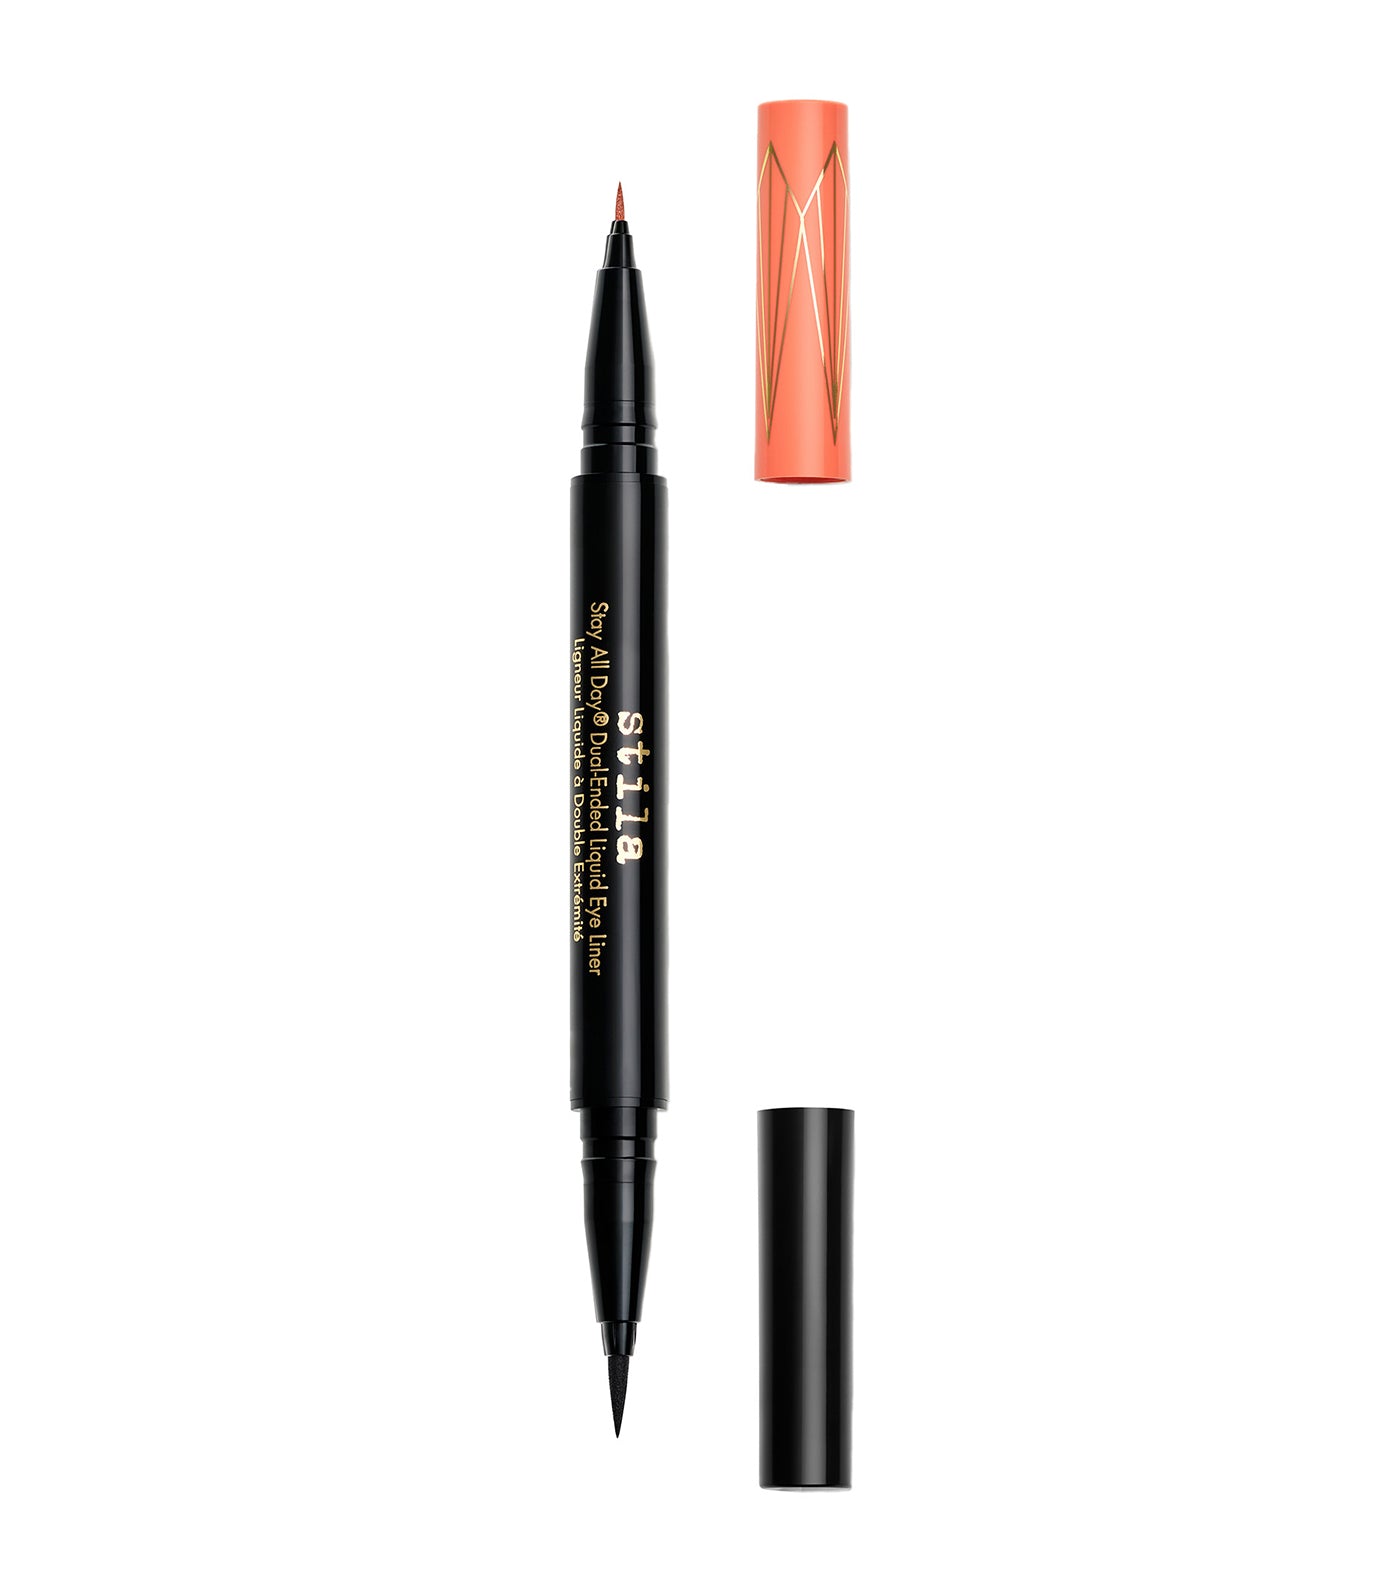 Stay All Day® Dual-Ended Liquid Eye Liner: Shimmer Micro Tip